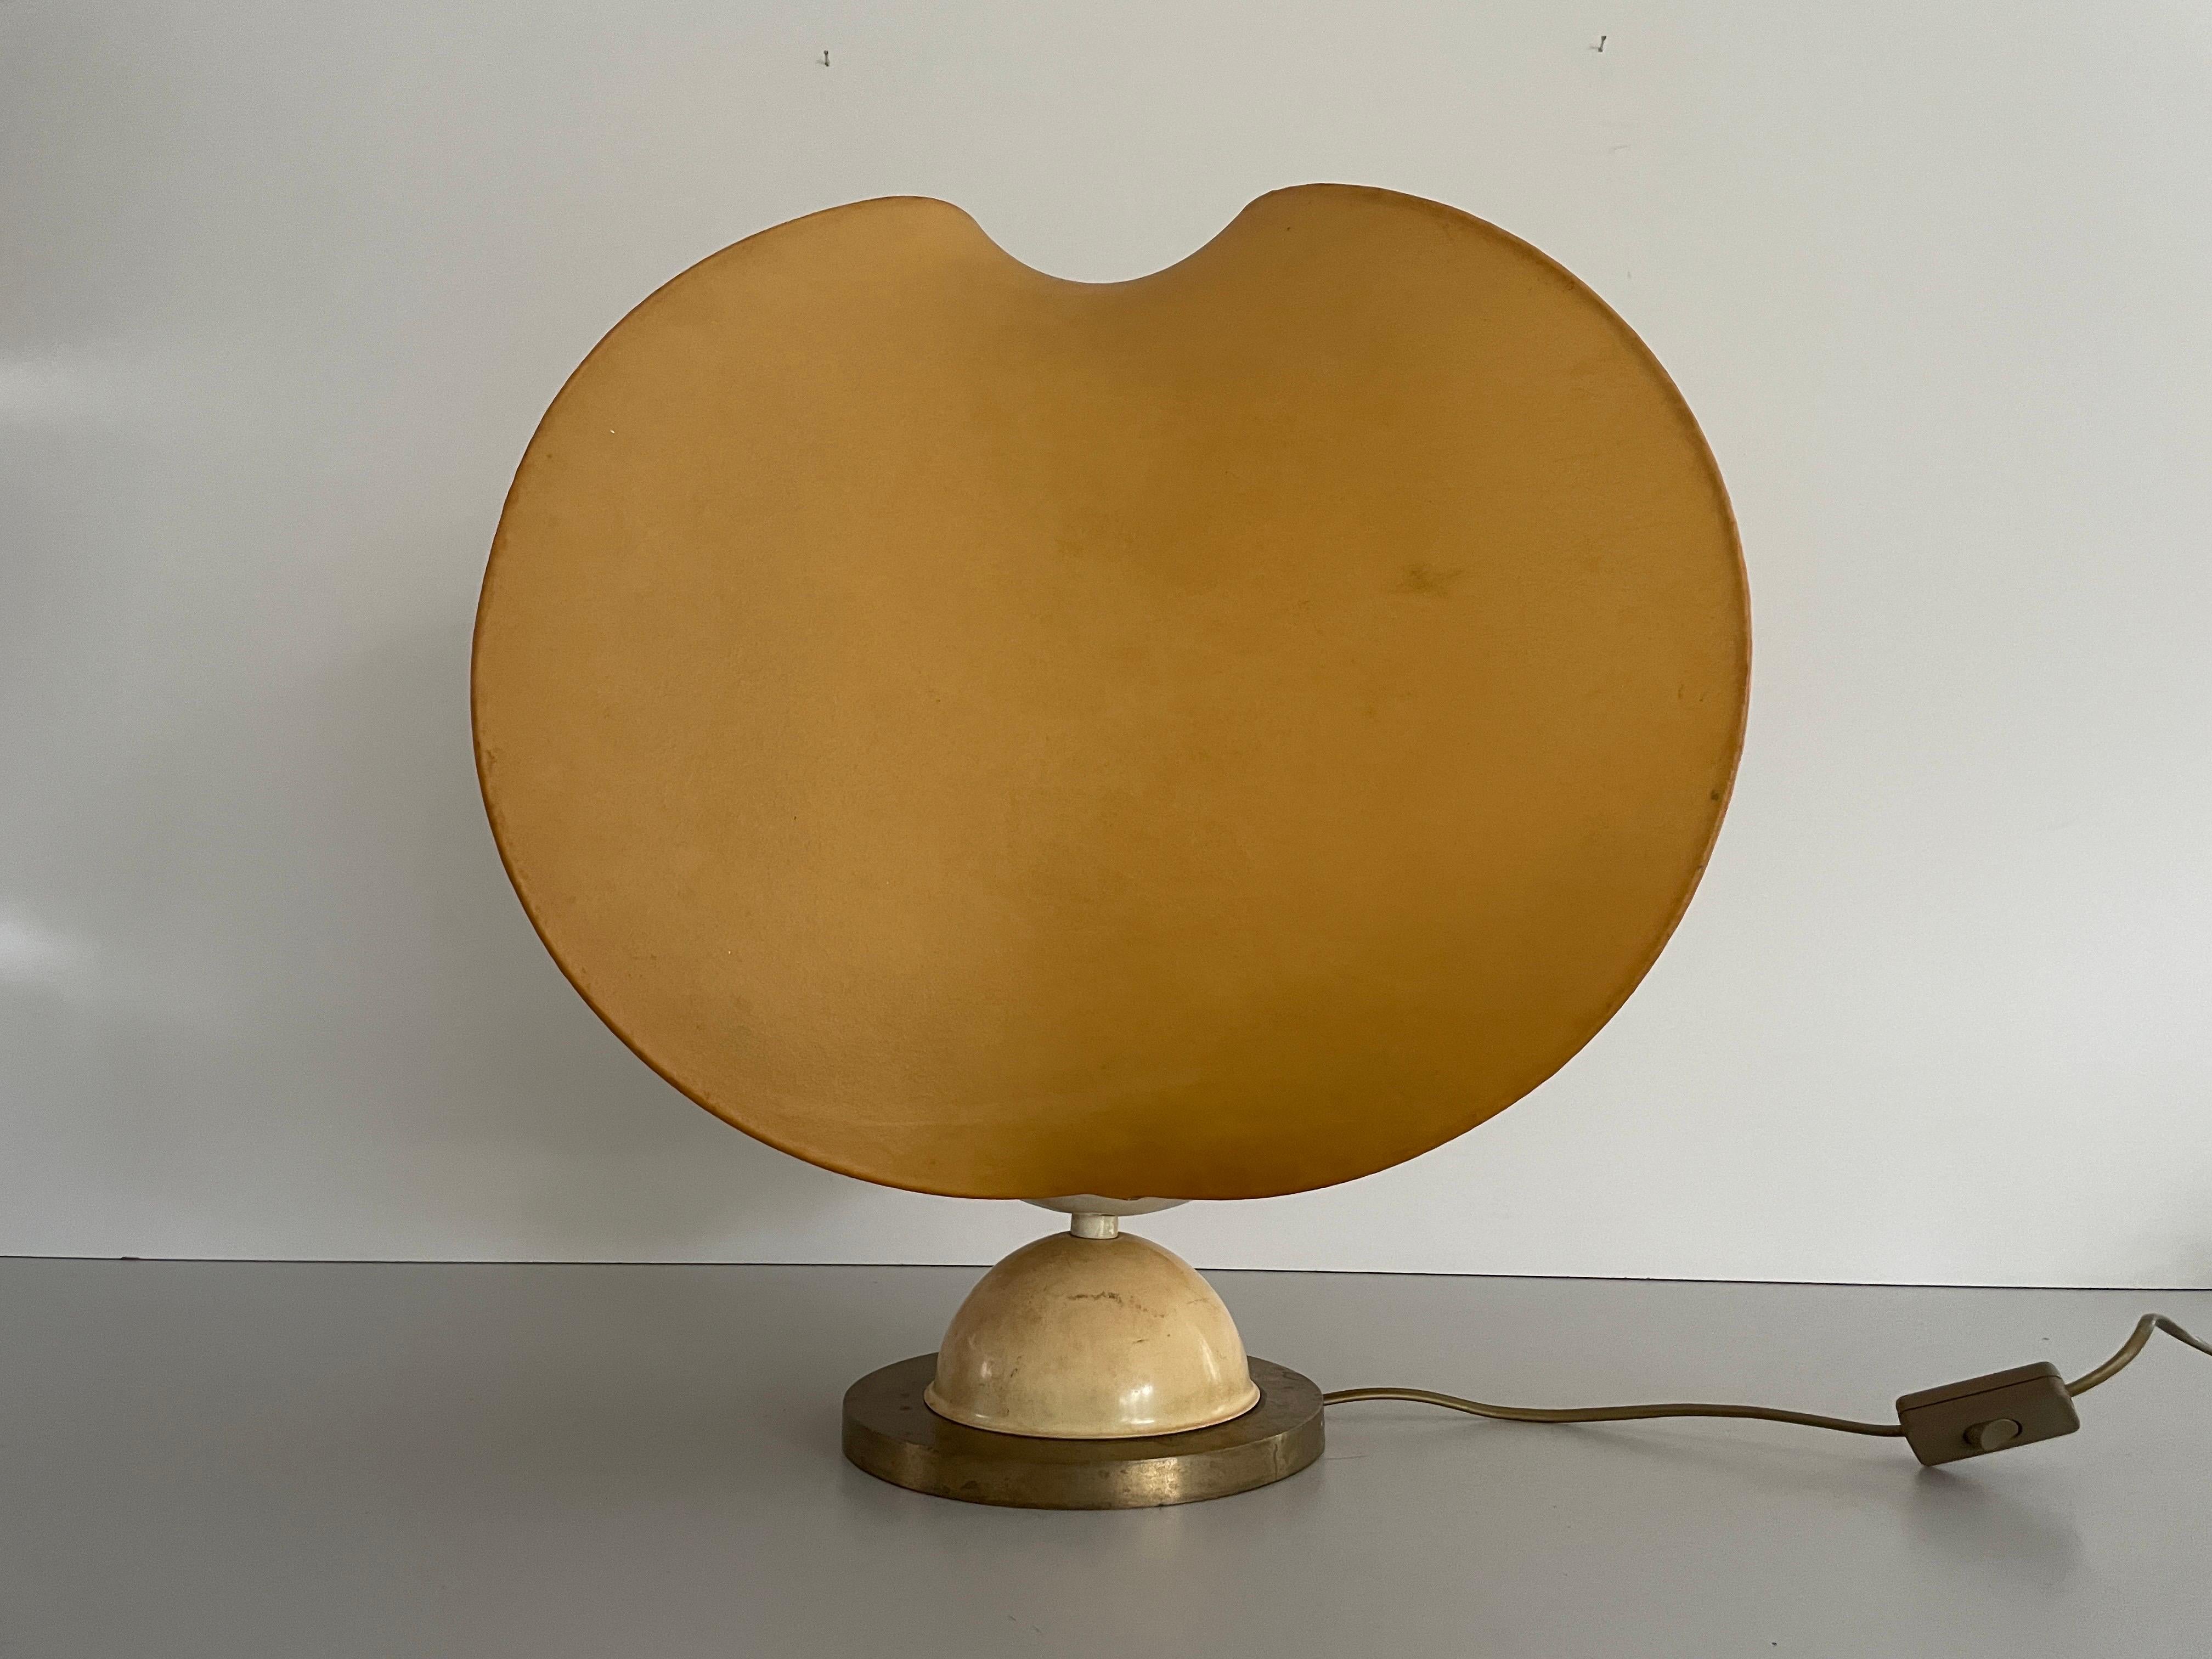 XL Cocoon Shade Table Lamp with Brass Base, 1960s, Italy

Minimal and natural design
Very high quality.
Fully functional.
Original cable and plug. These lamps are suitable for EU plug socket. 

Lamps are in very good vintage condition.
Wear